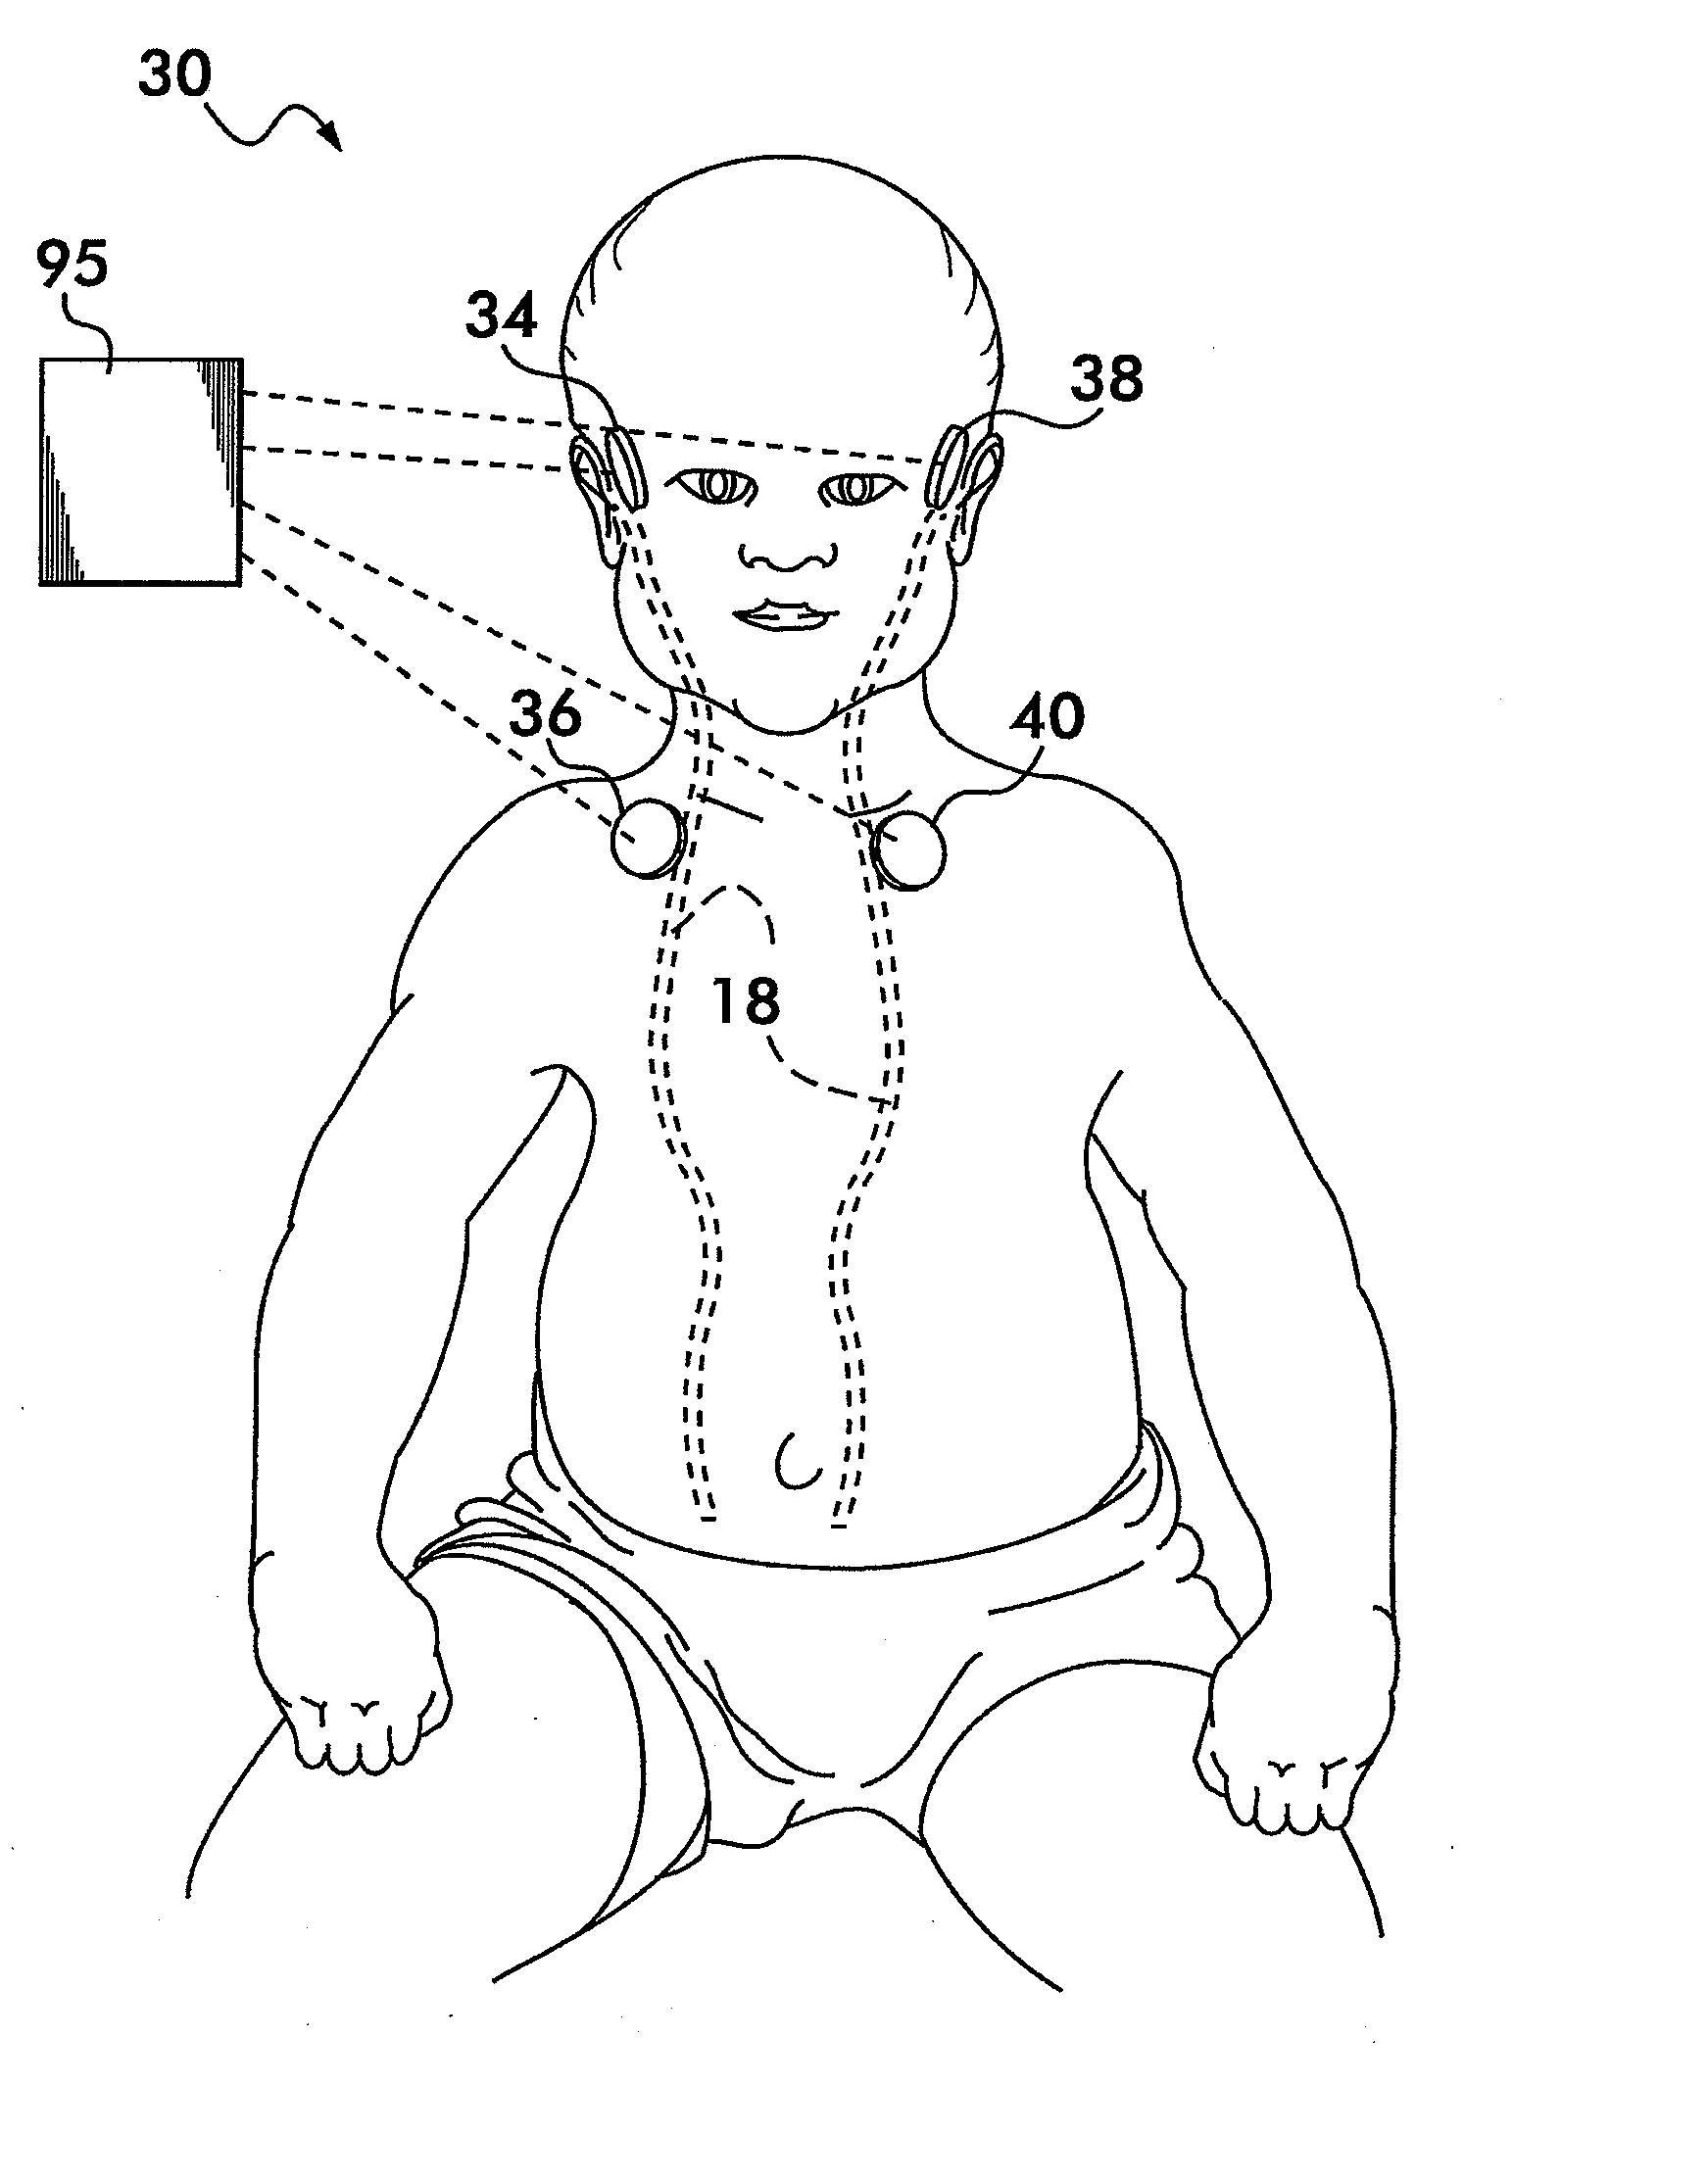 Cerebrospinal Fluid Evaluation Systems